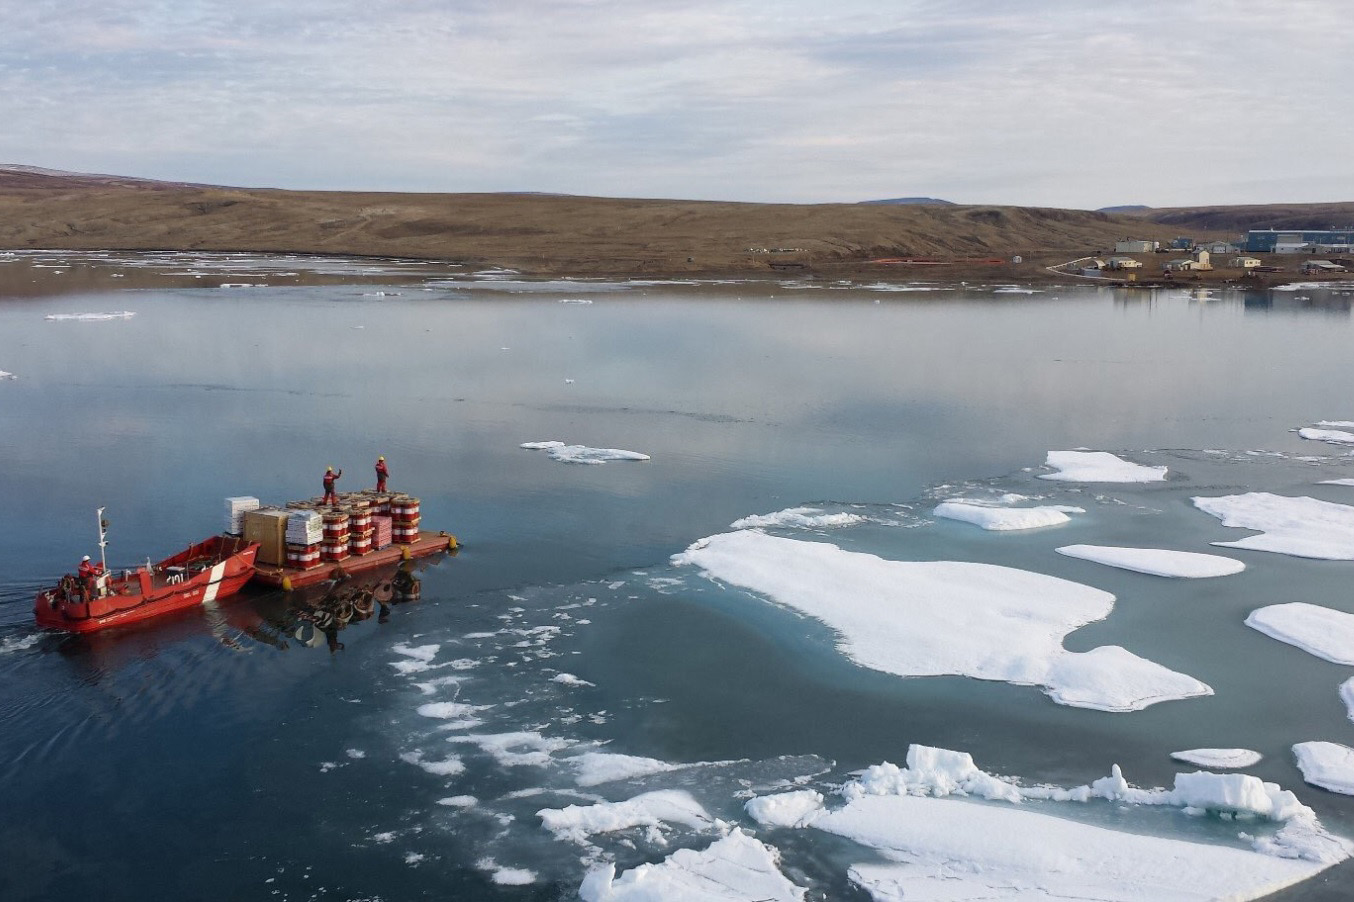 CCGS Des Groseilliers’ barge resupplying Eureka base station with fuel and cargo